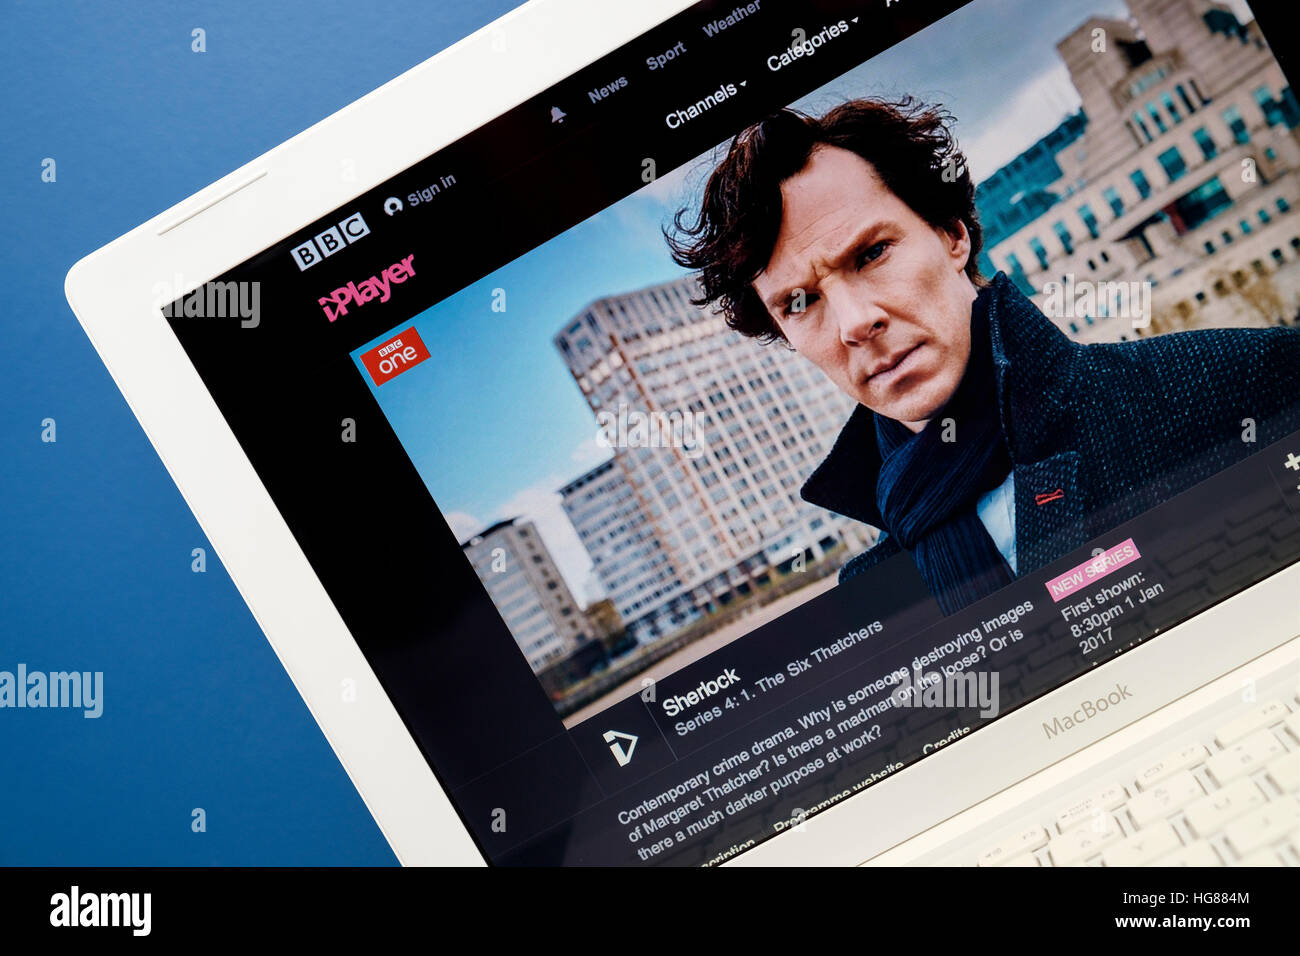 BBC iplayer website playing the tv show Sherlock viewed on a laptop computer screen Stock Photo